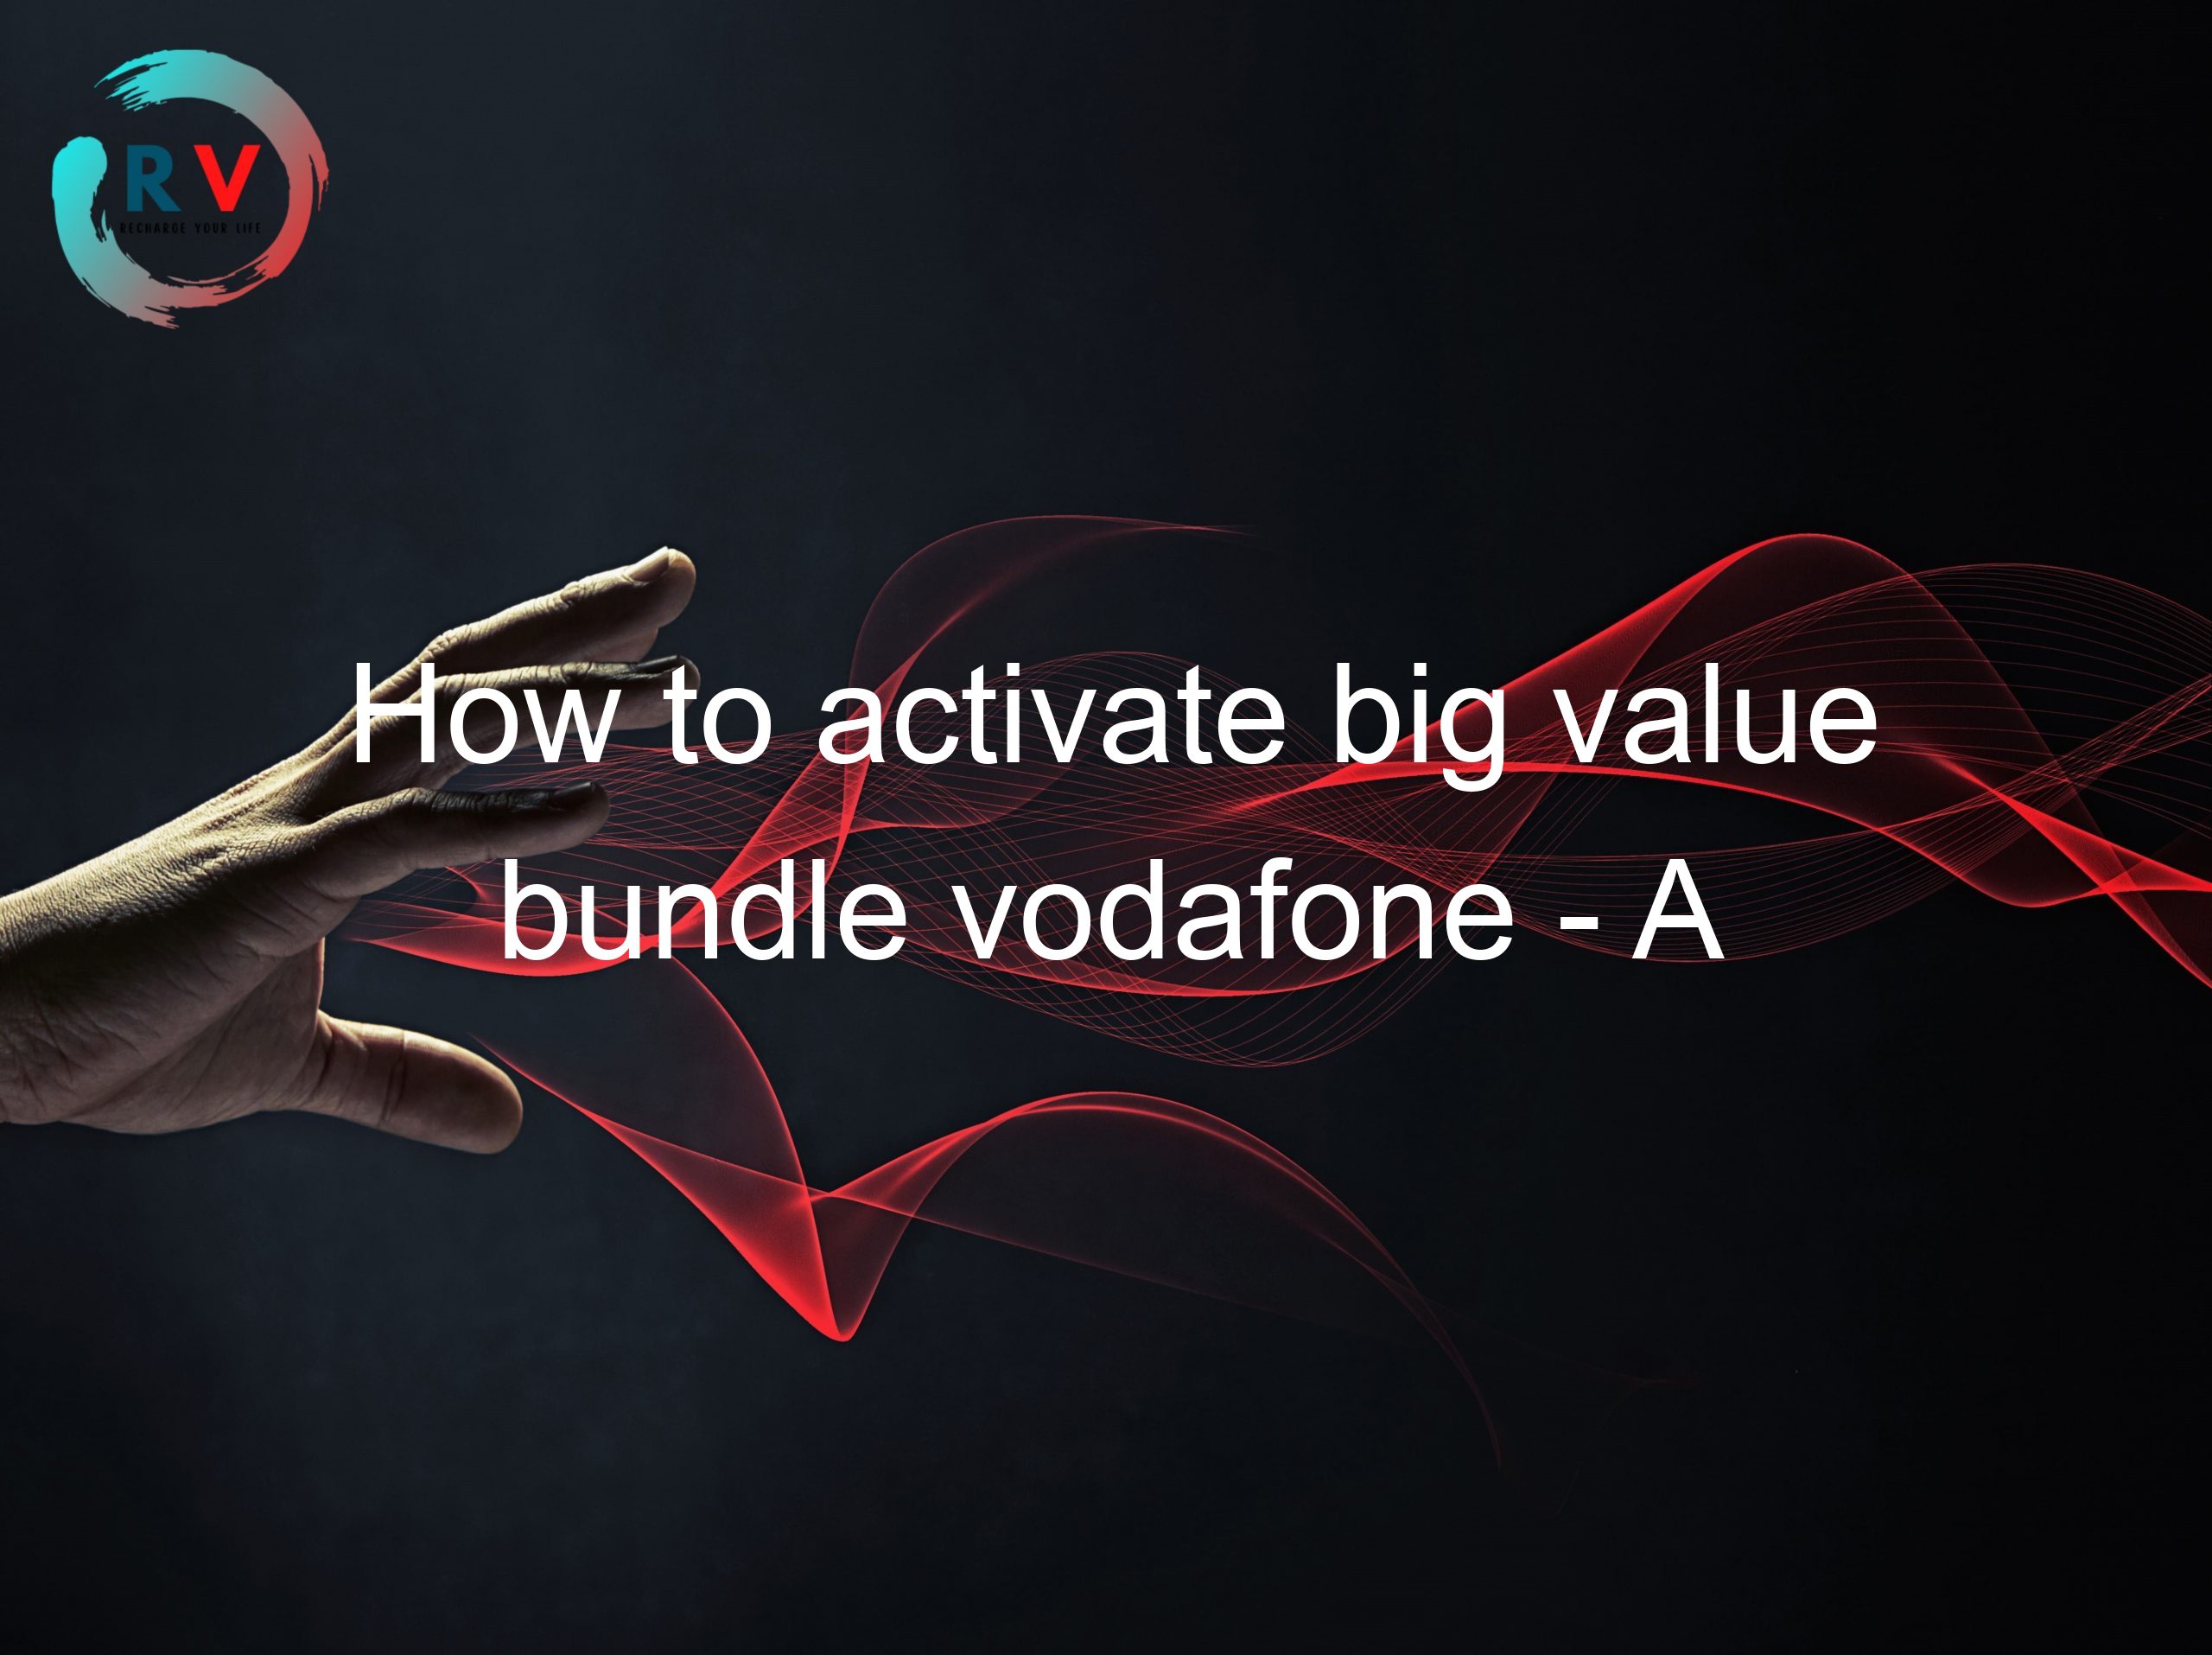 How to activate big value bundle vodafone - A simple guideWith this guide